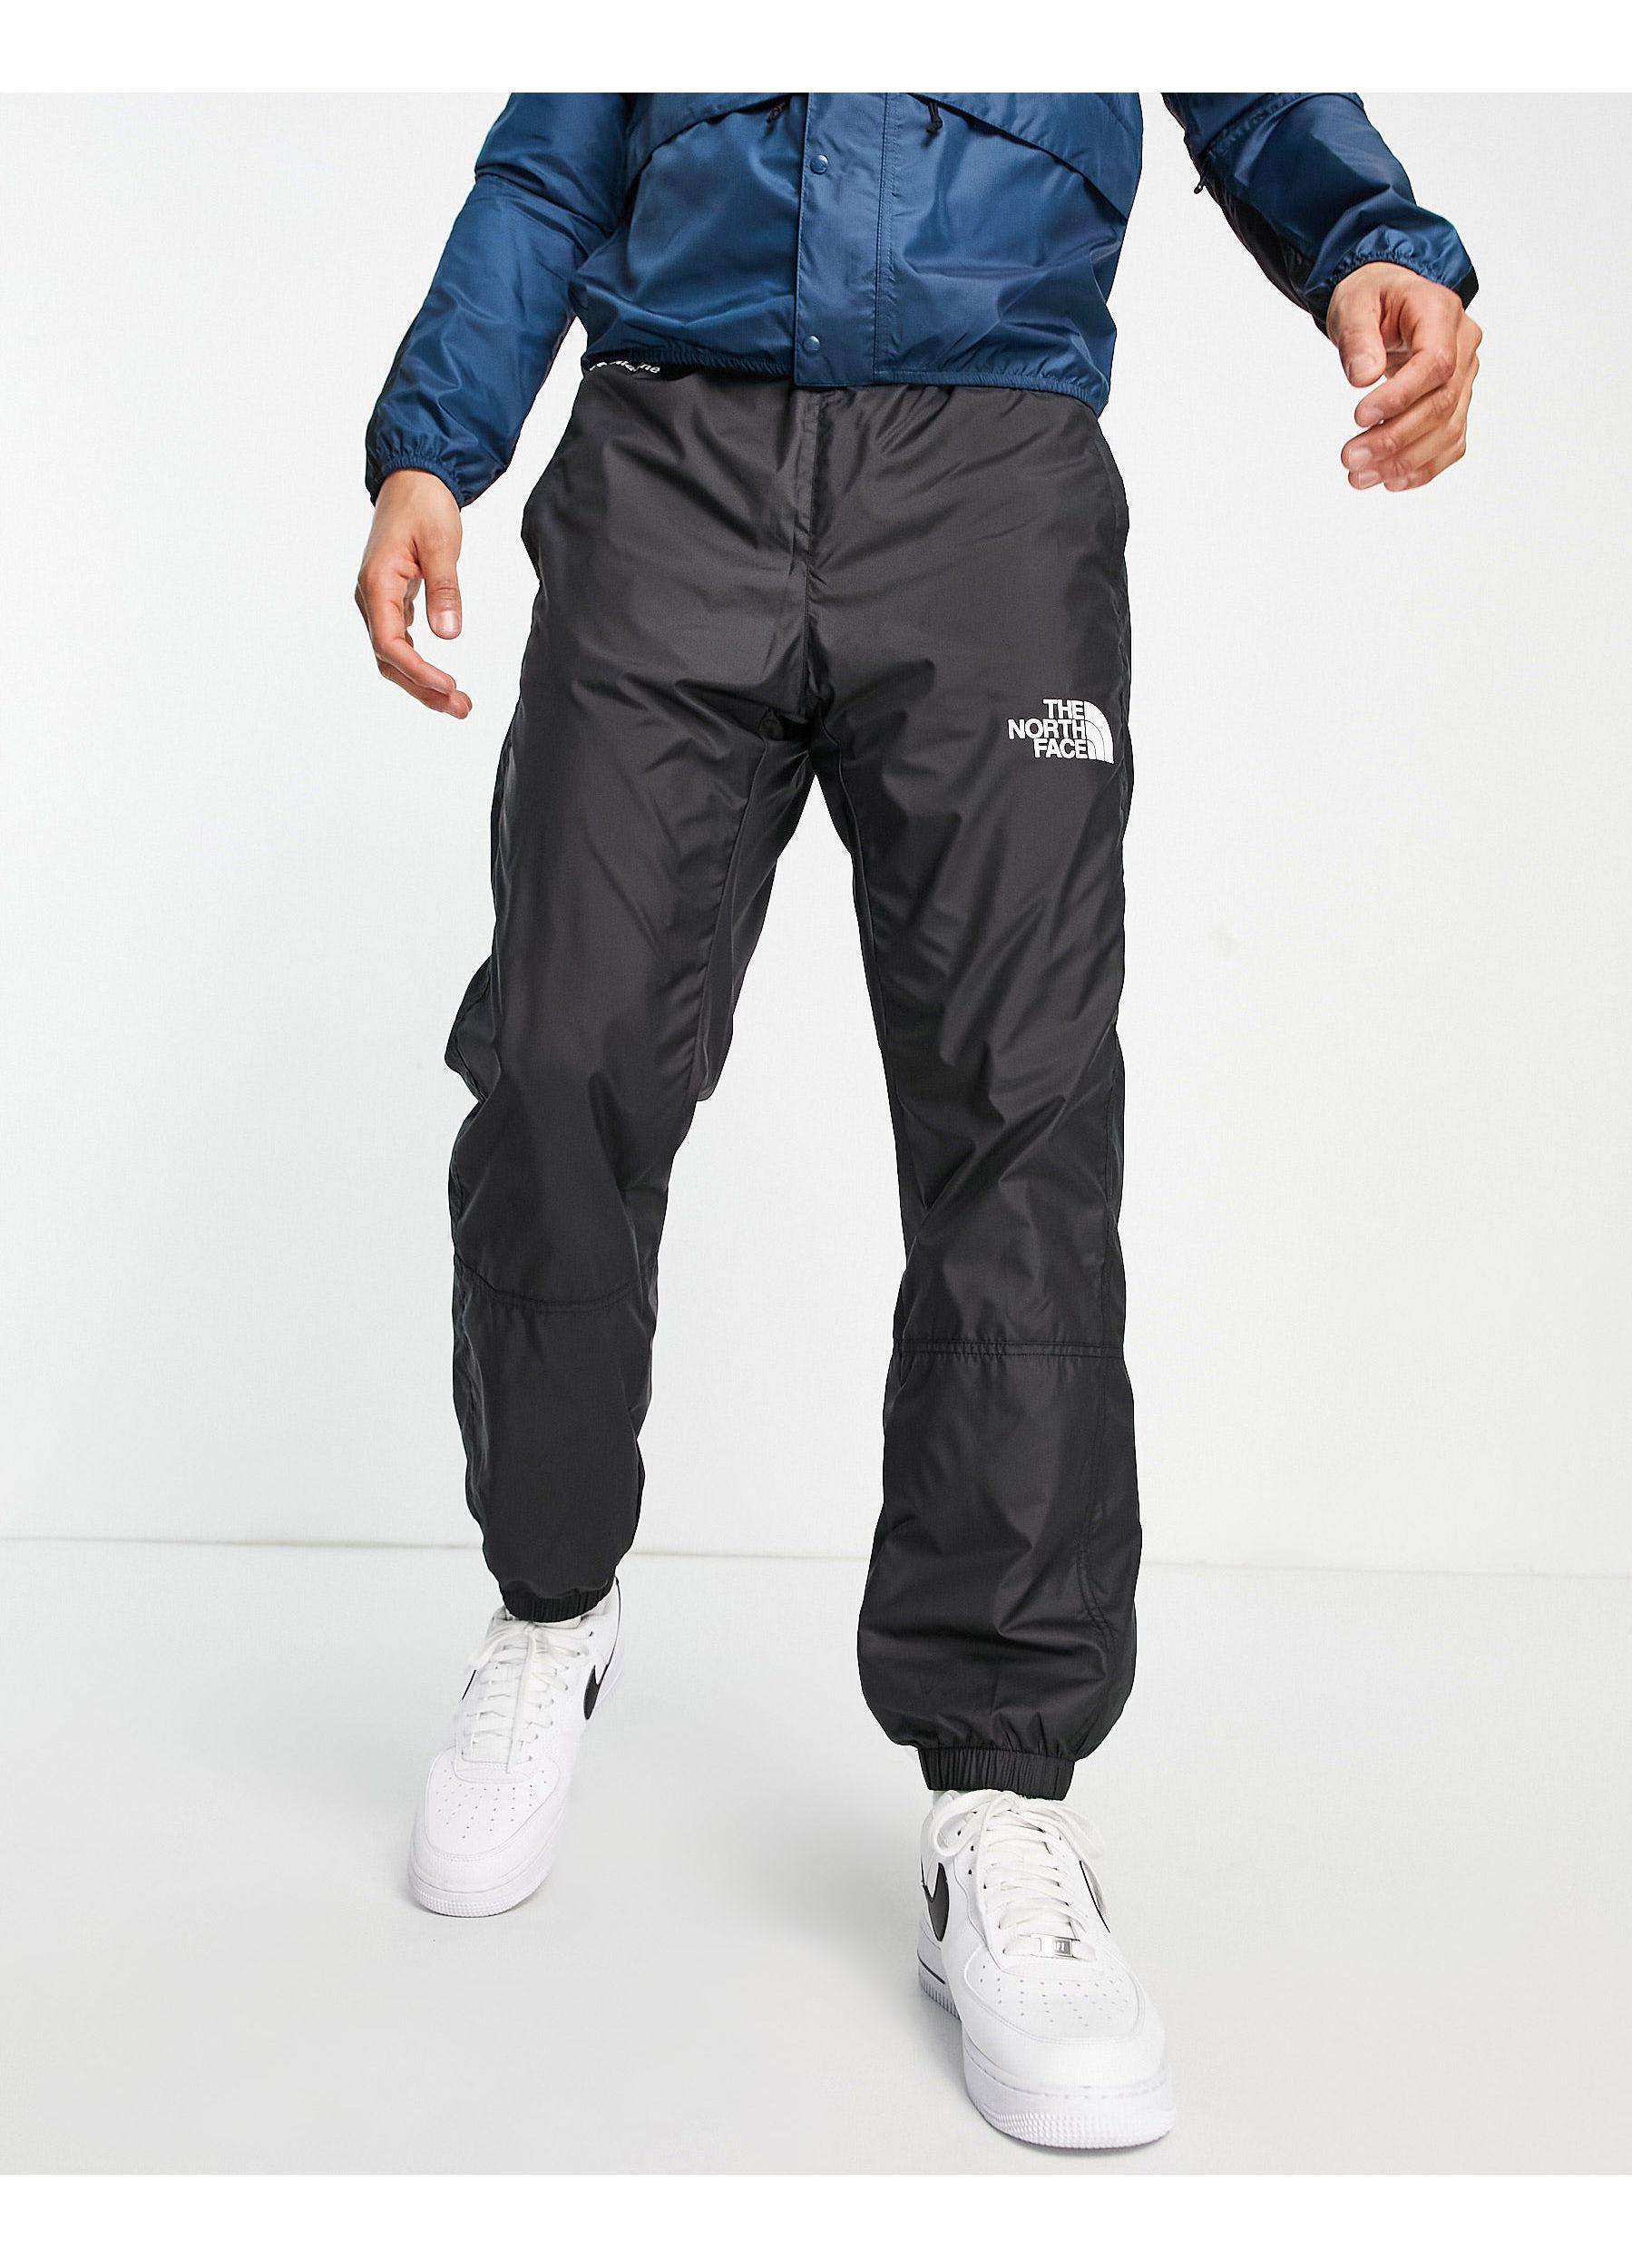 The North Face Hydrenaline Wind joggers in |